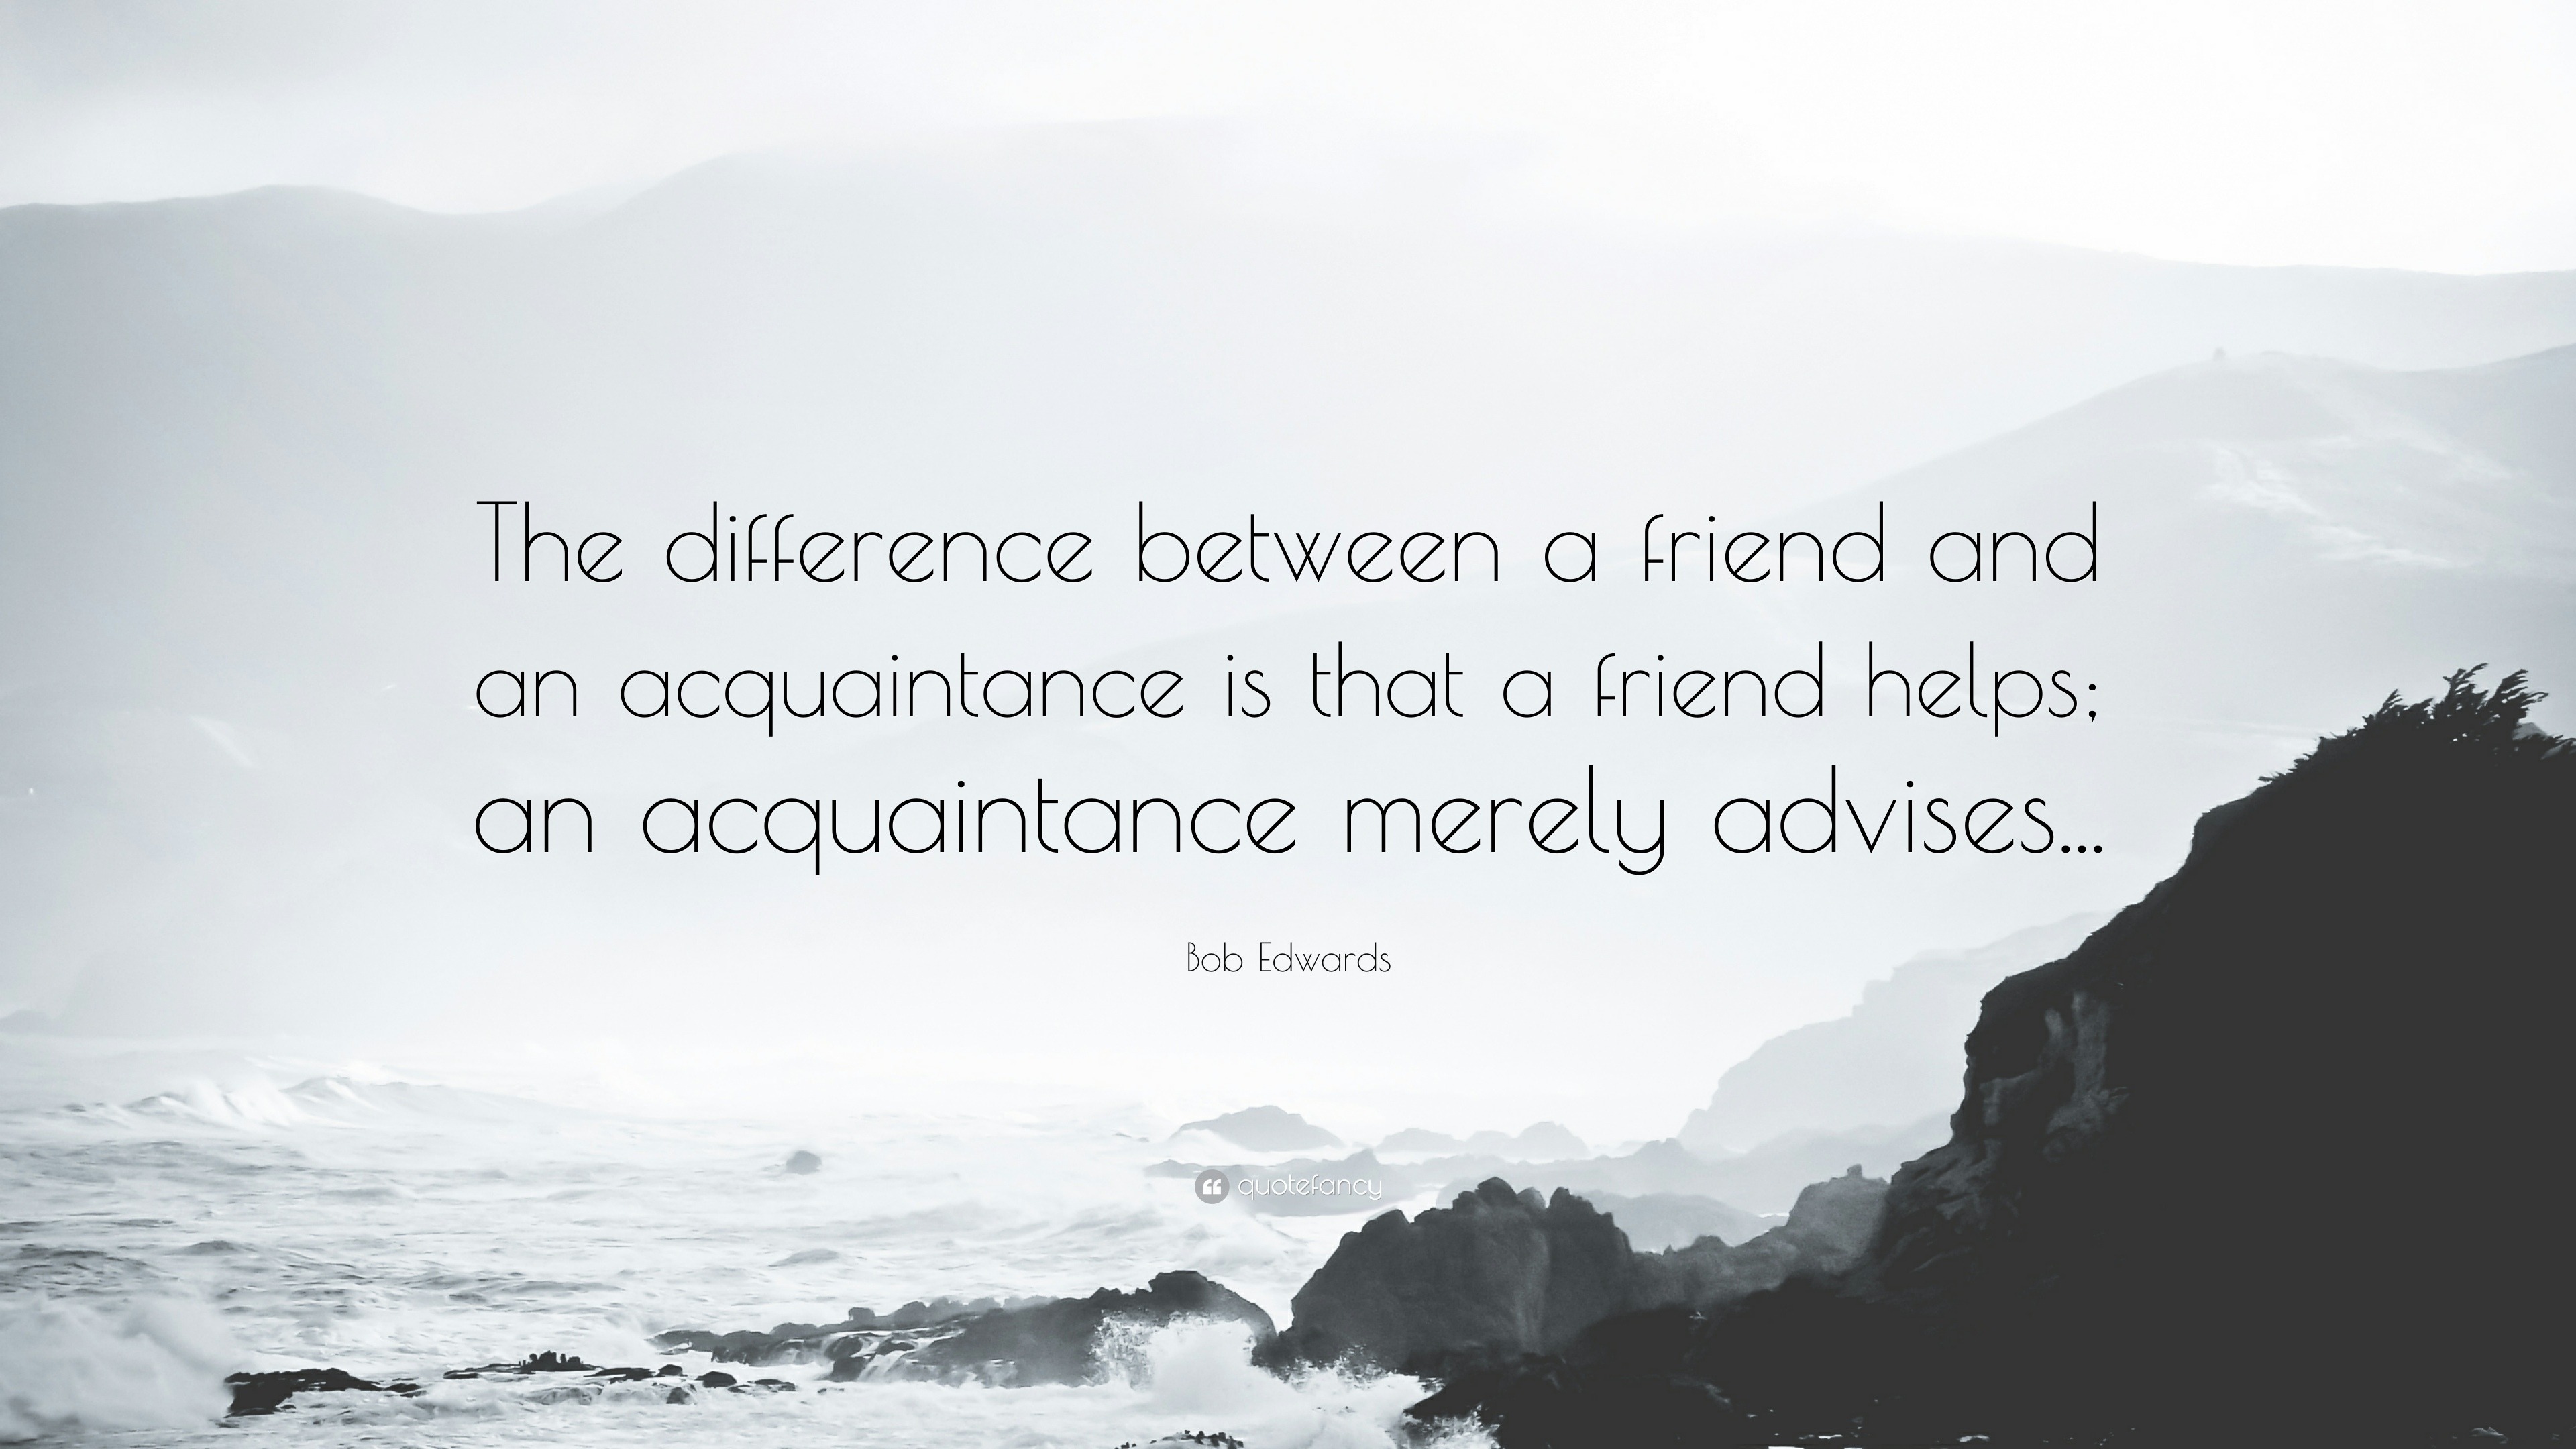 Bob Edwards Quote The Difference Between A Friend And An Acquaintance Is That A Friend Helps